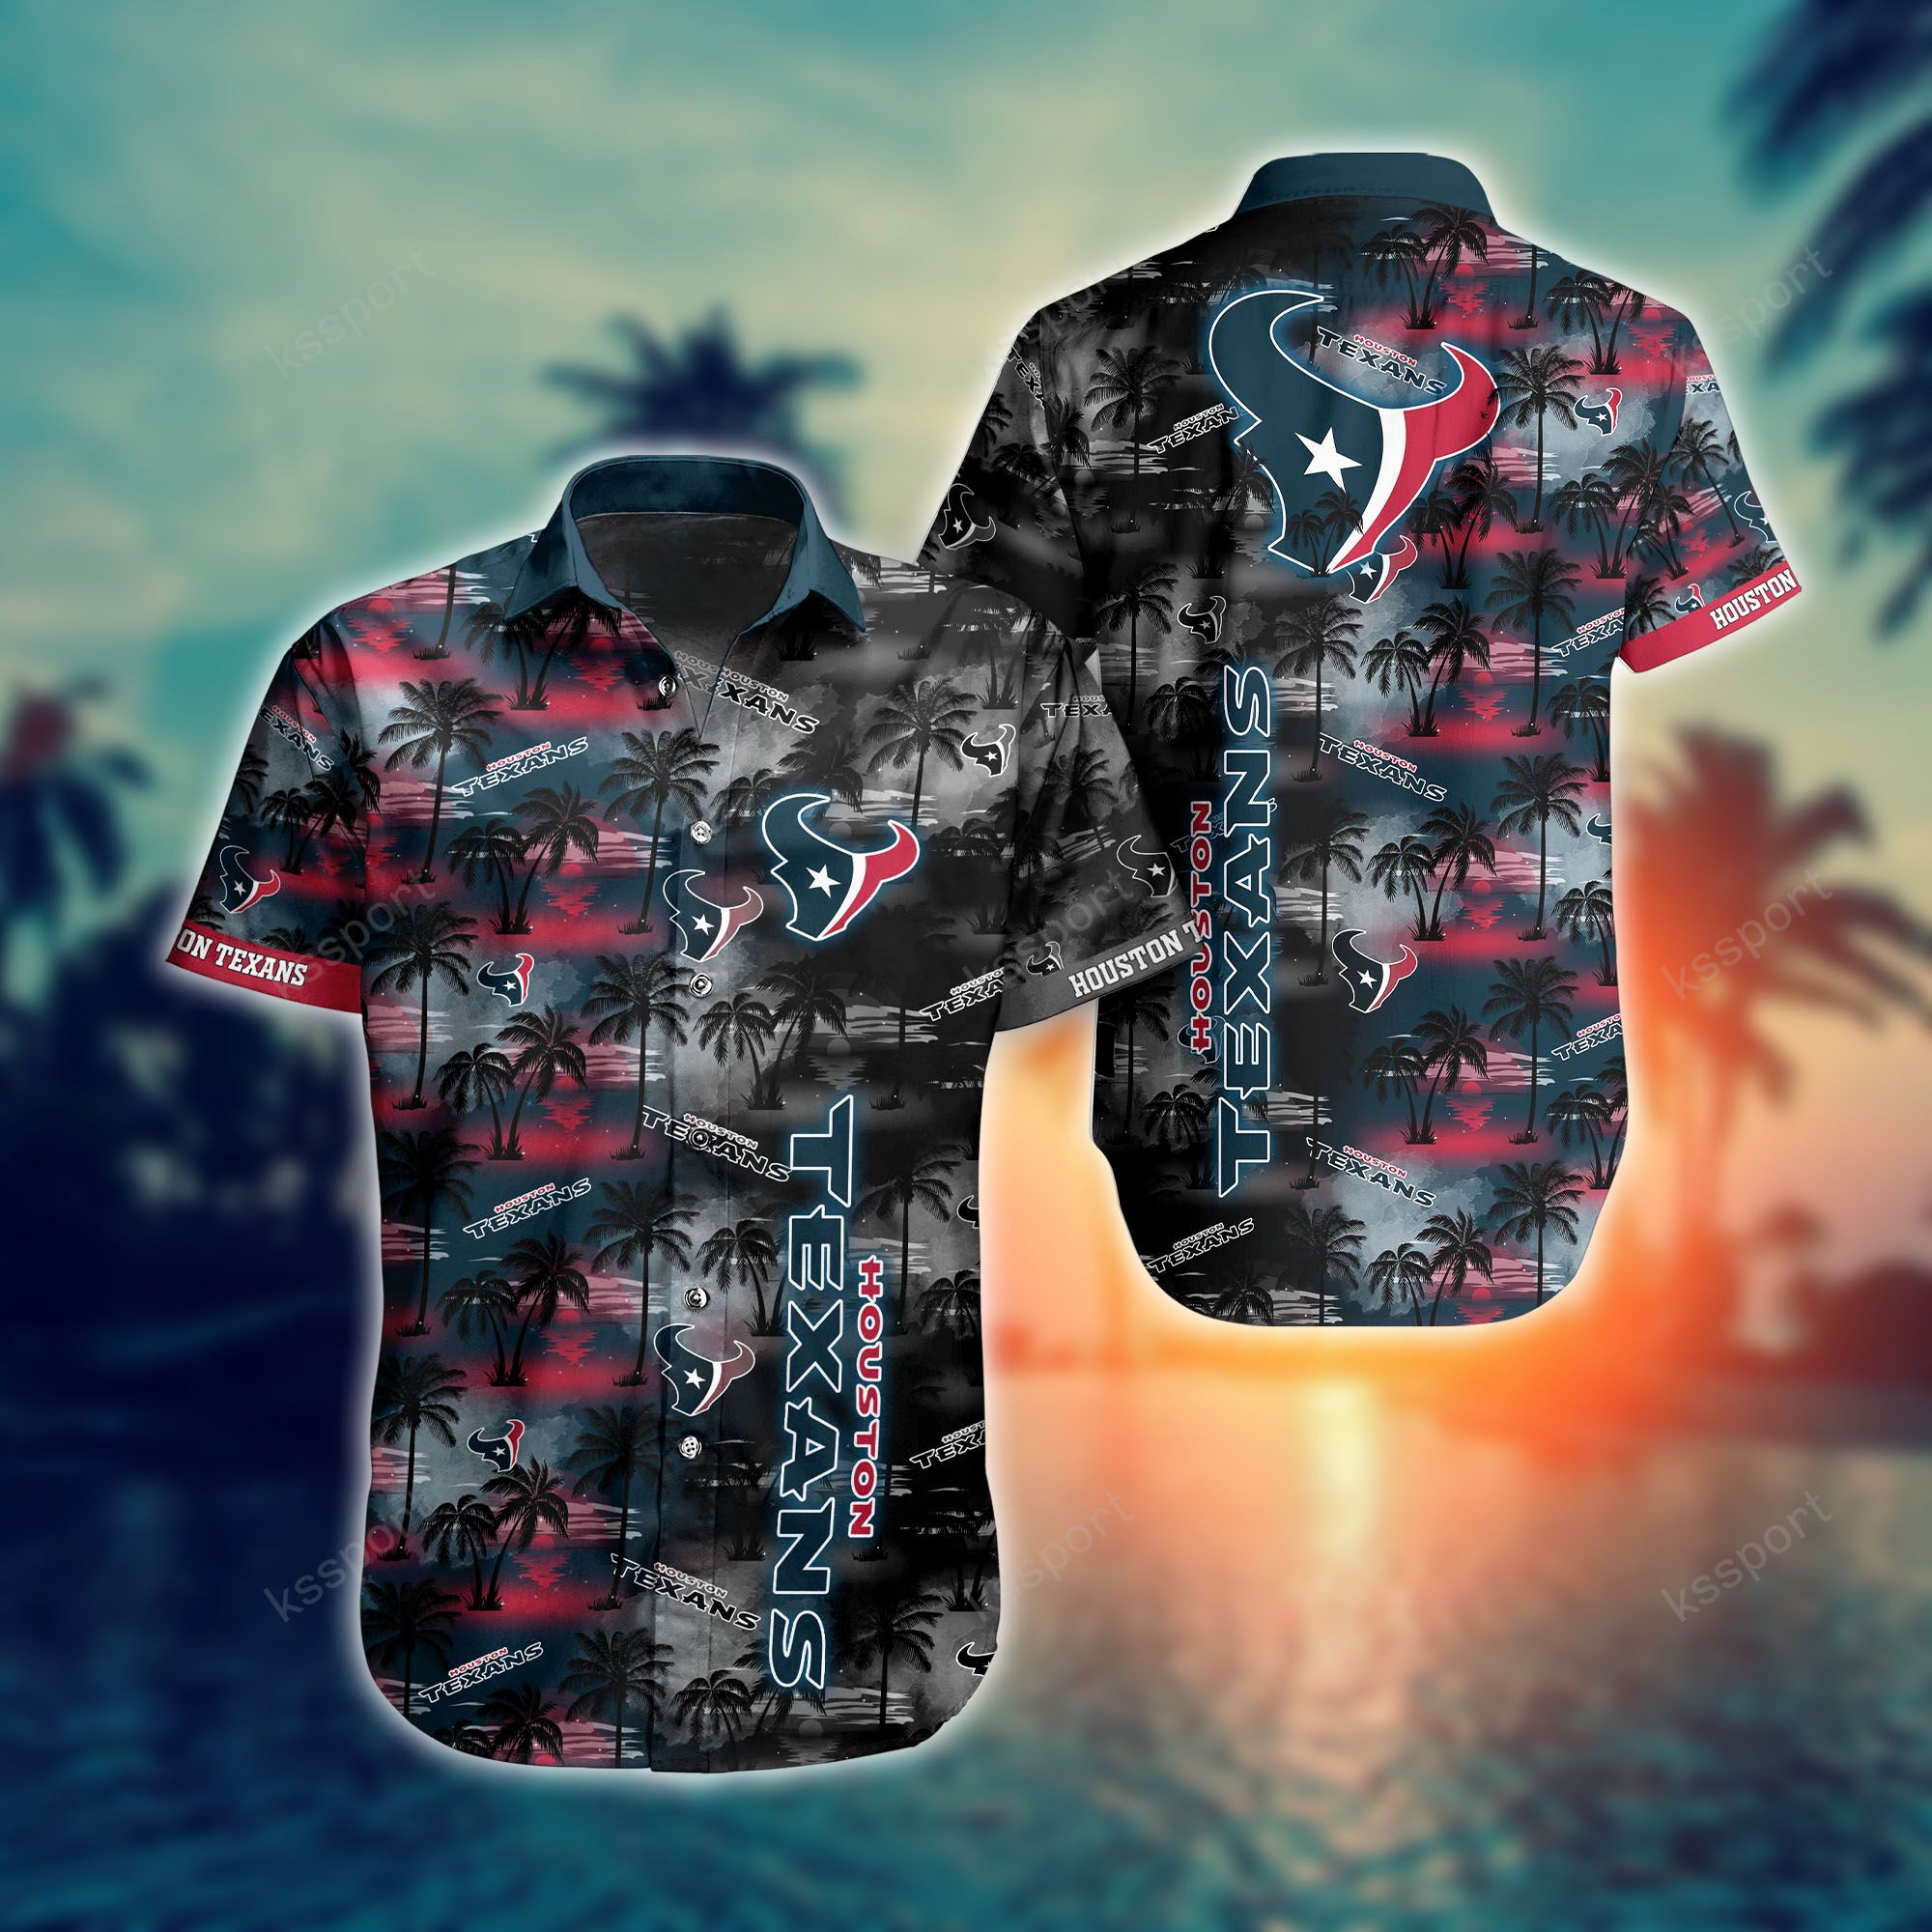 Treat yourself to a cool Hawaiian set today! 86